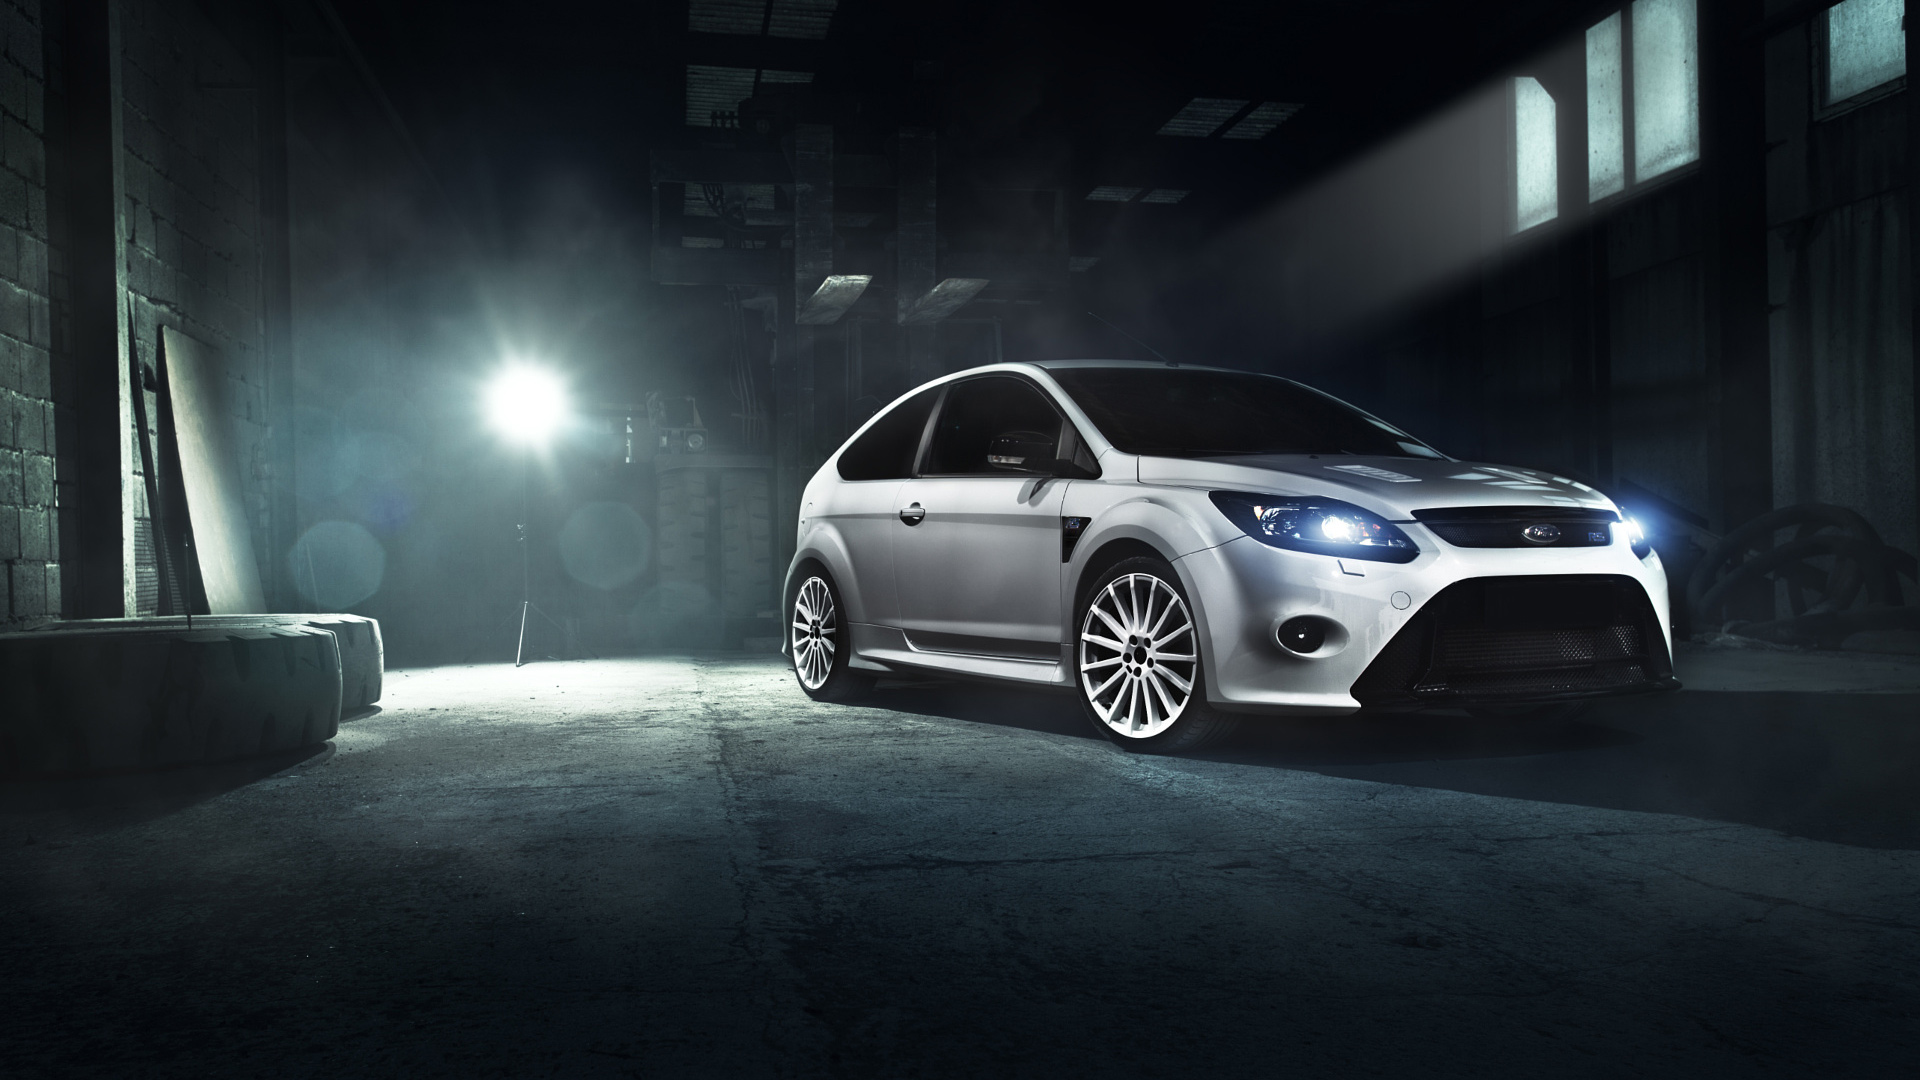 Ford Focus RS White Wallpaper | HD Car Wallpapers | ID #6874